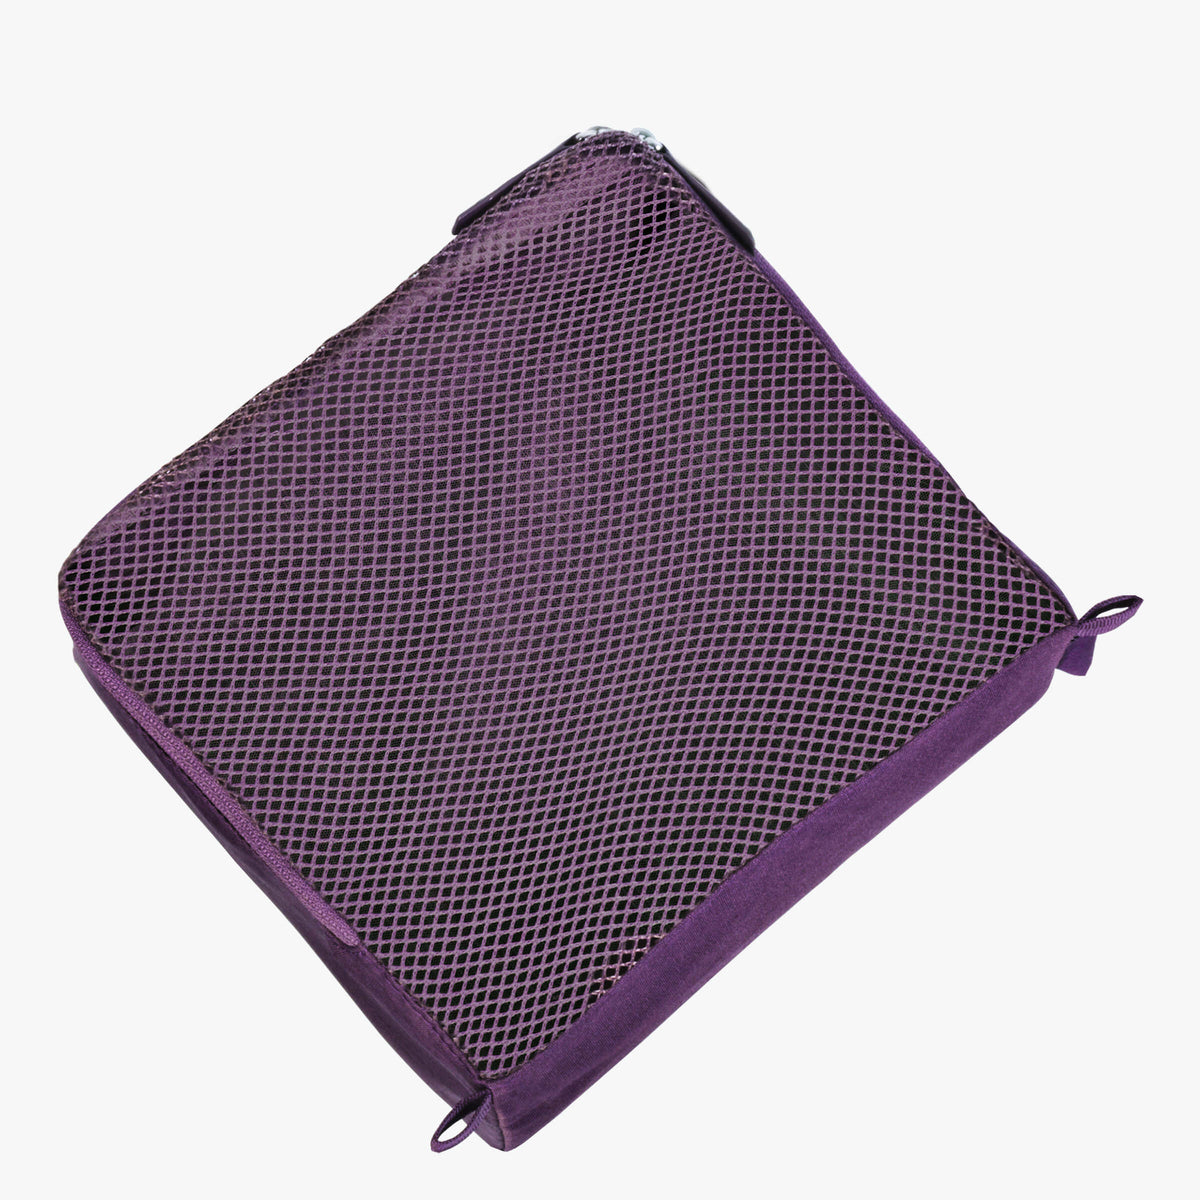 Ricardo Beverly Hills Essentials 2.0 Small Packing Cube Aubergine